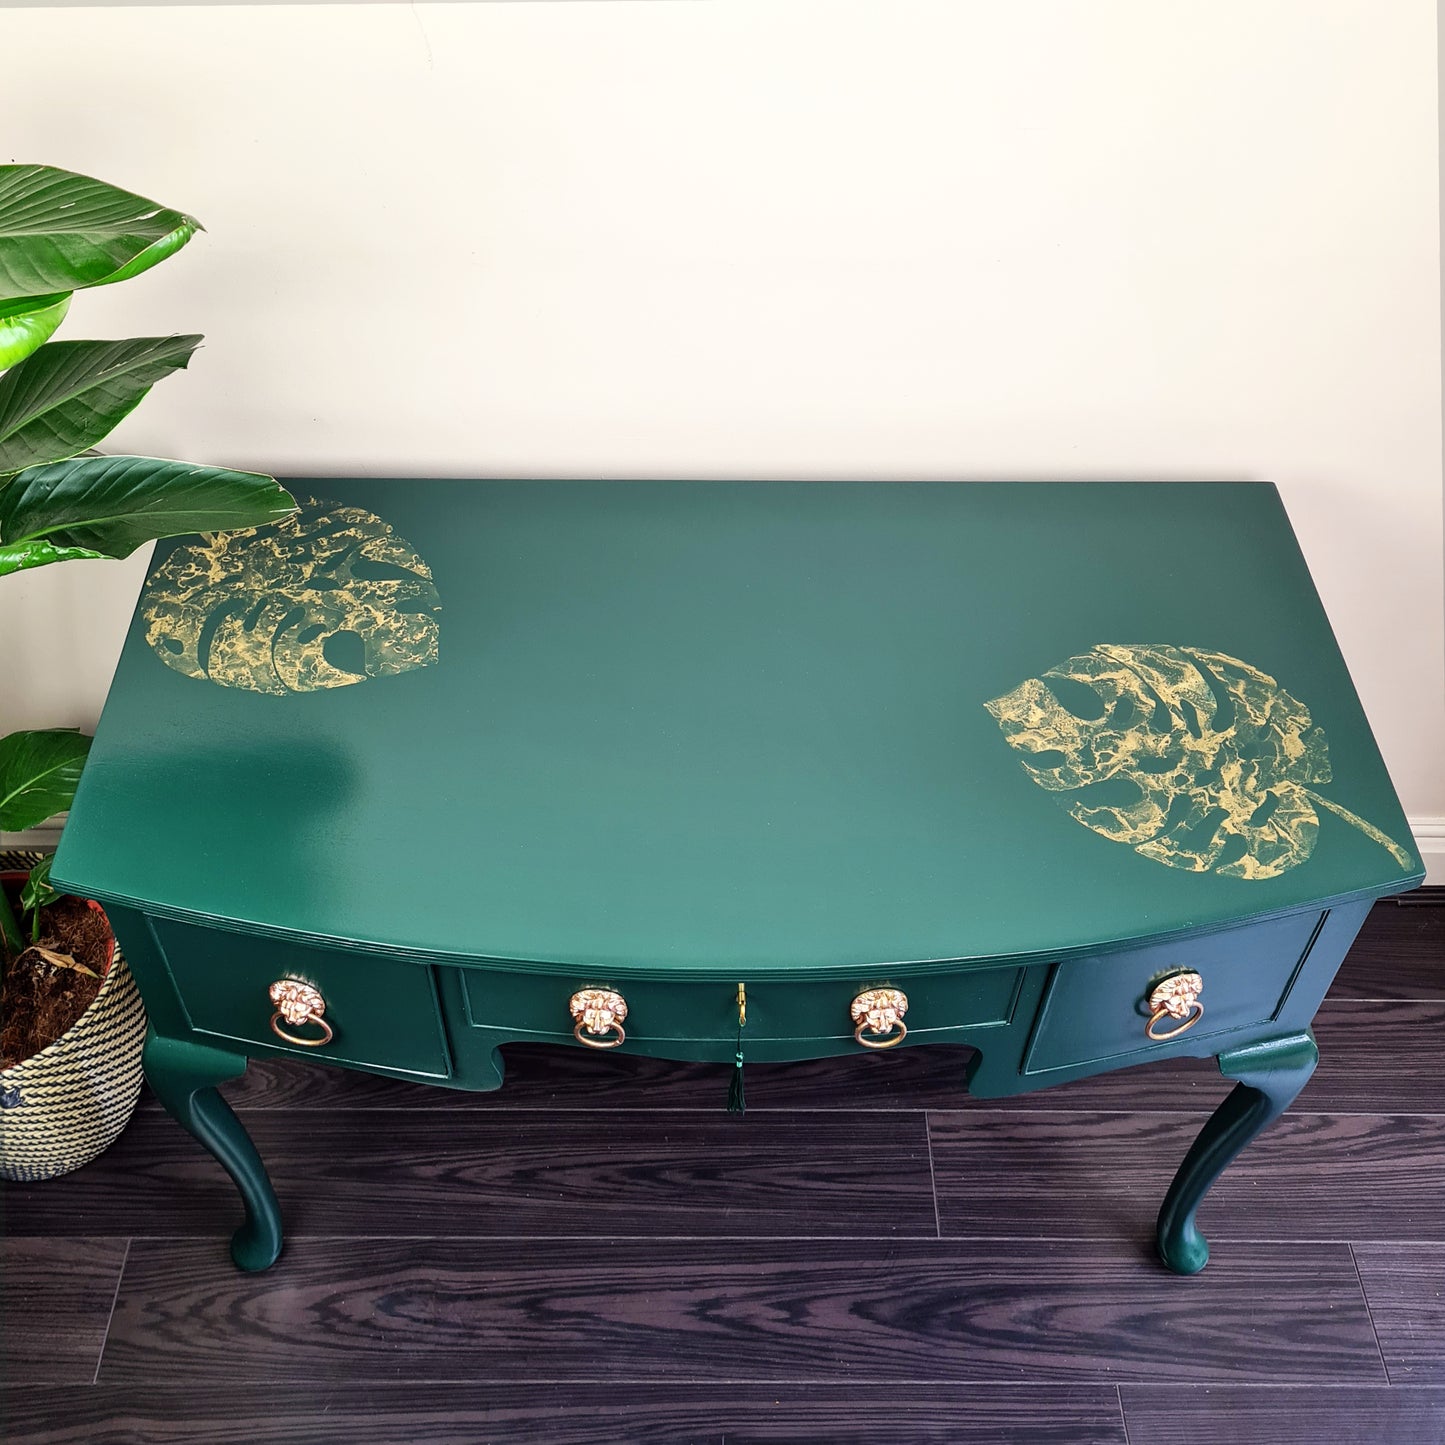 Upcycled Sideboard with Monstera Leaves & Lion Head Handles